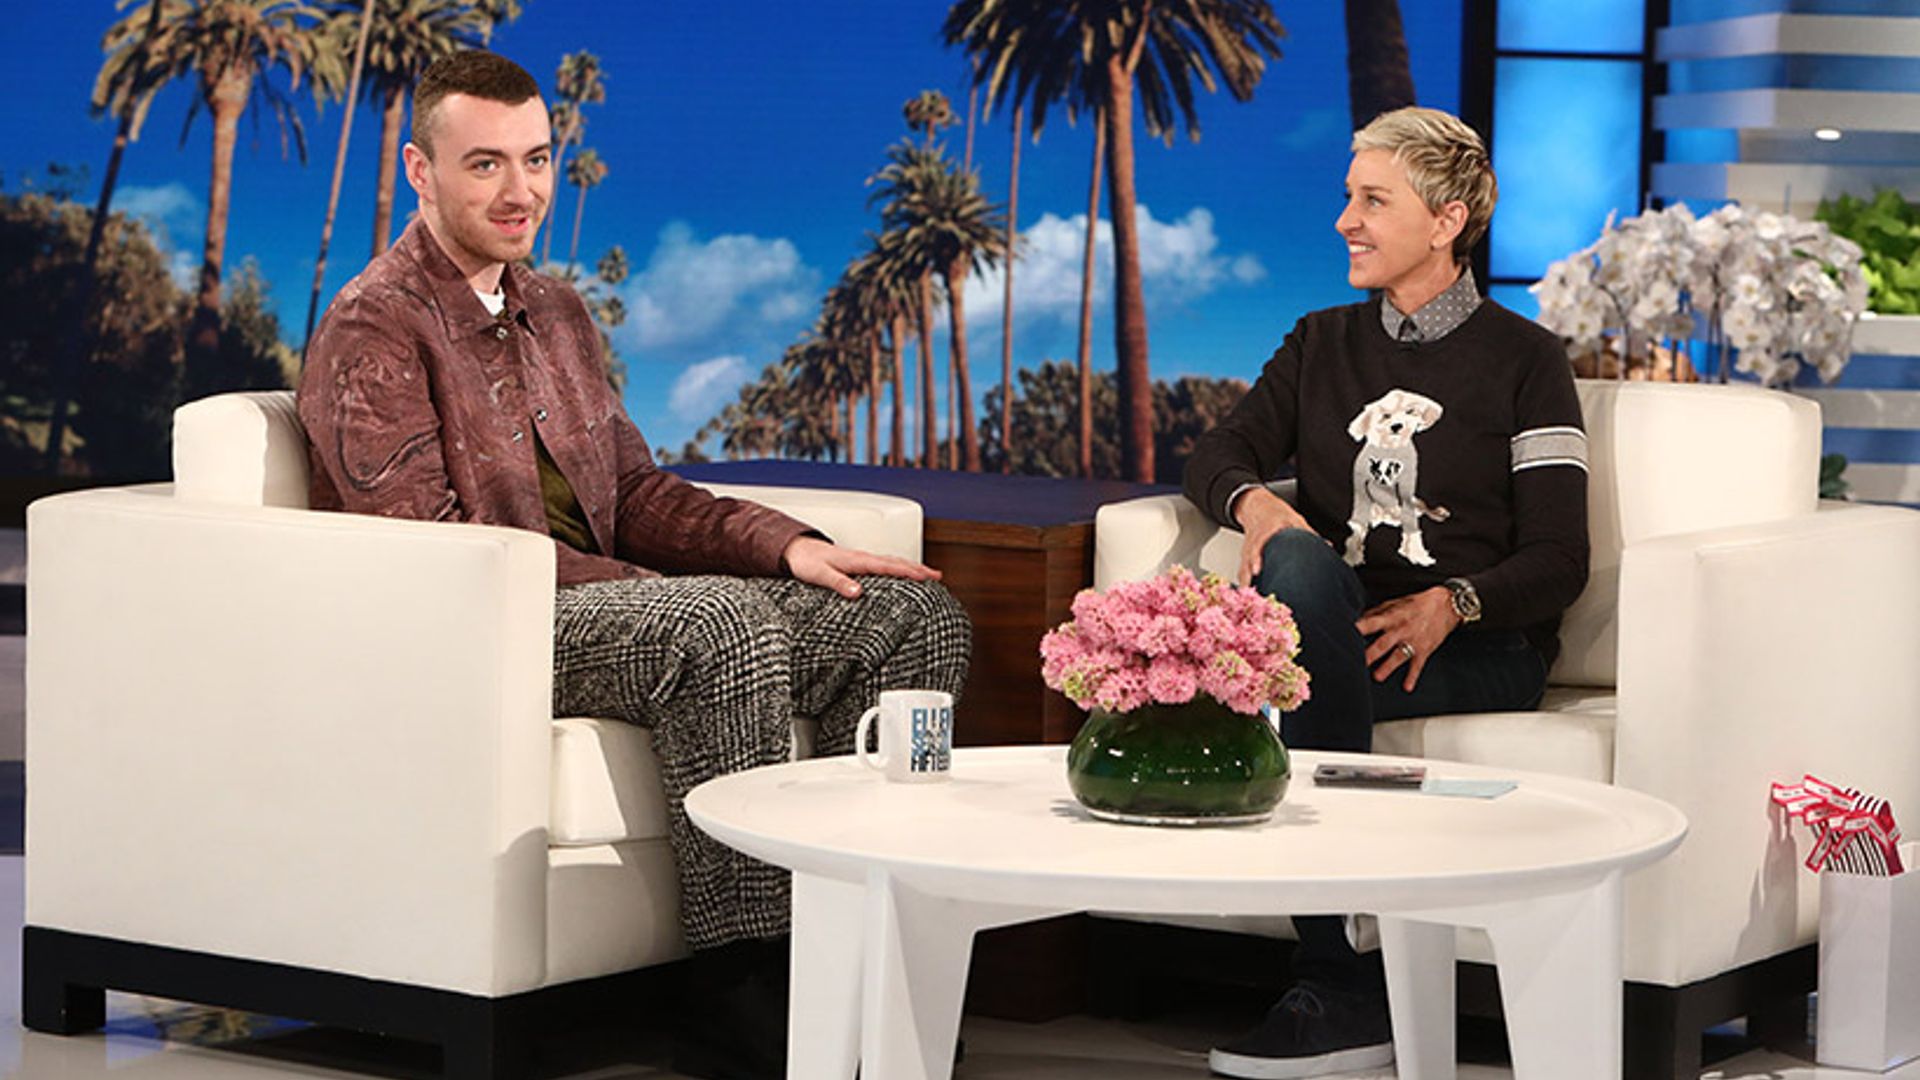 Sam Smith opens up about Oscar controversy: 'I mucked up'